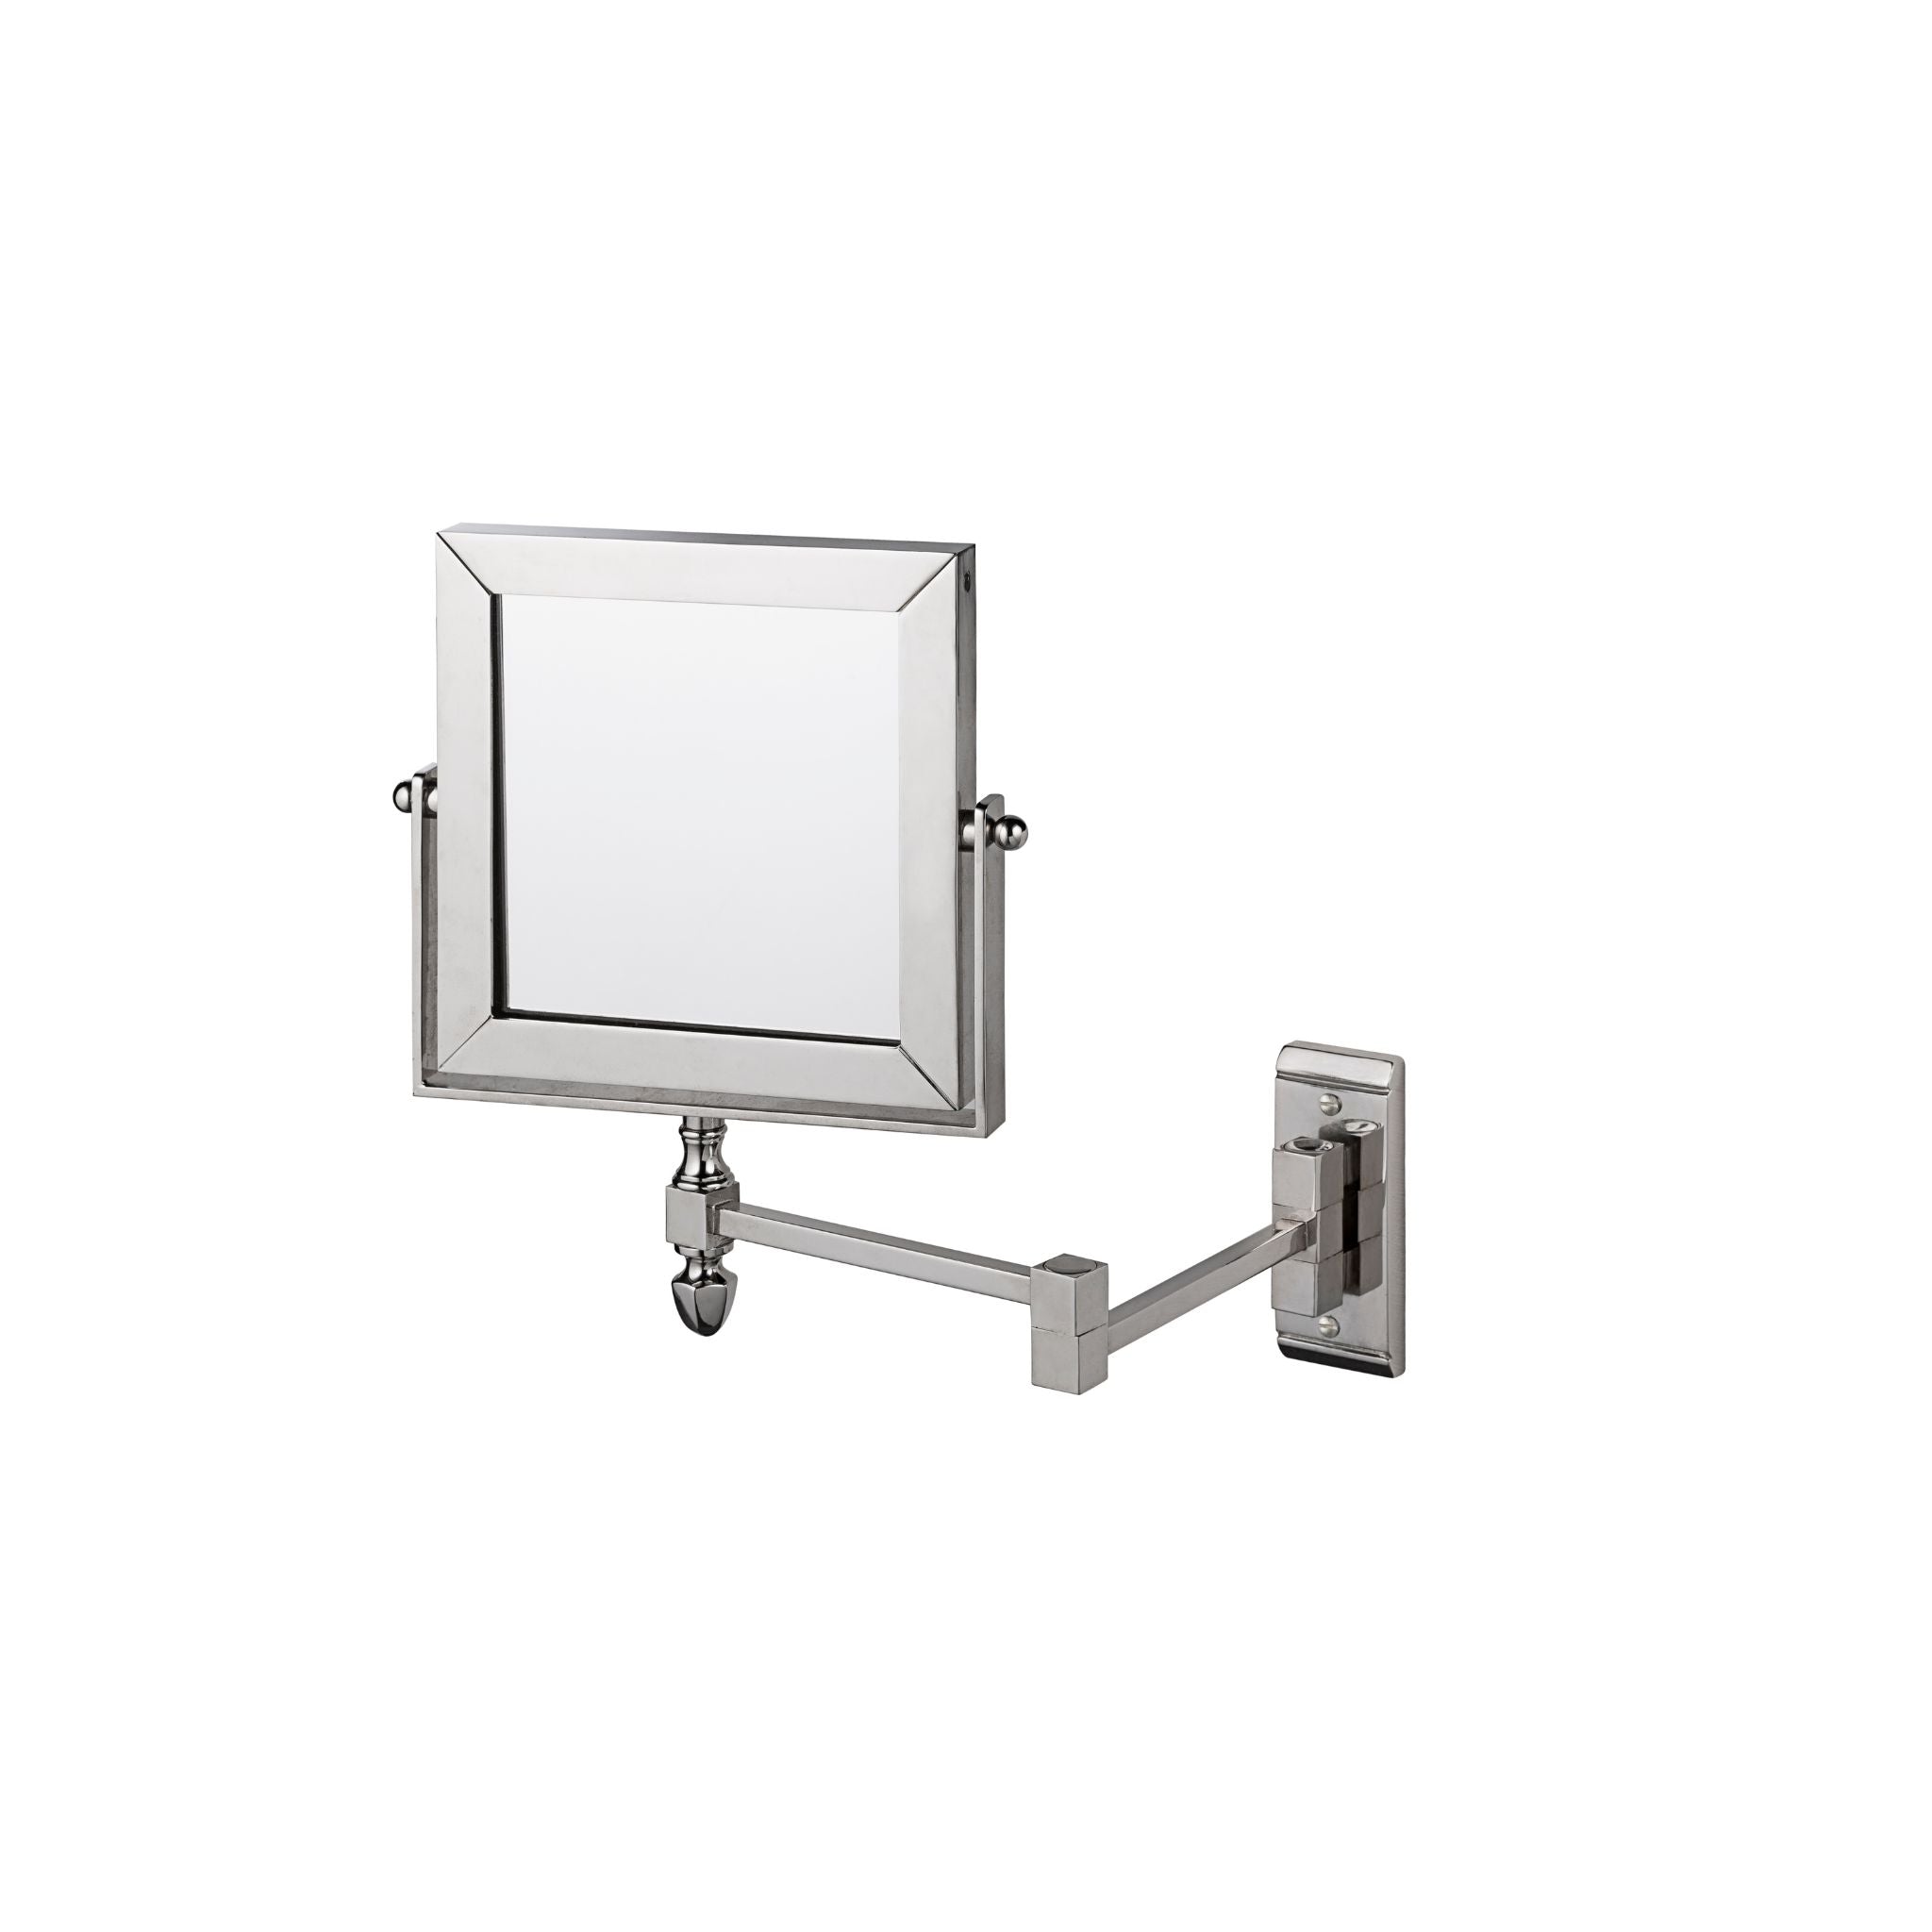 Brass dual side adjustable mirror with jointed arms - ilbronzetto